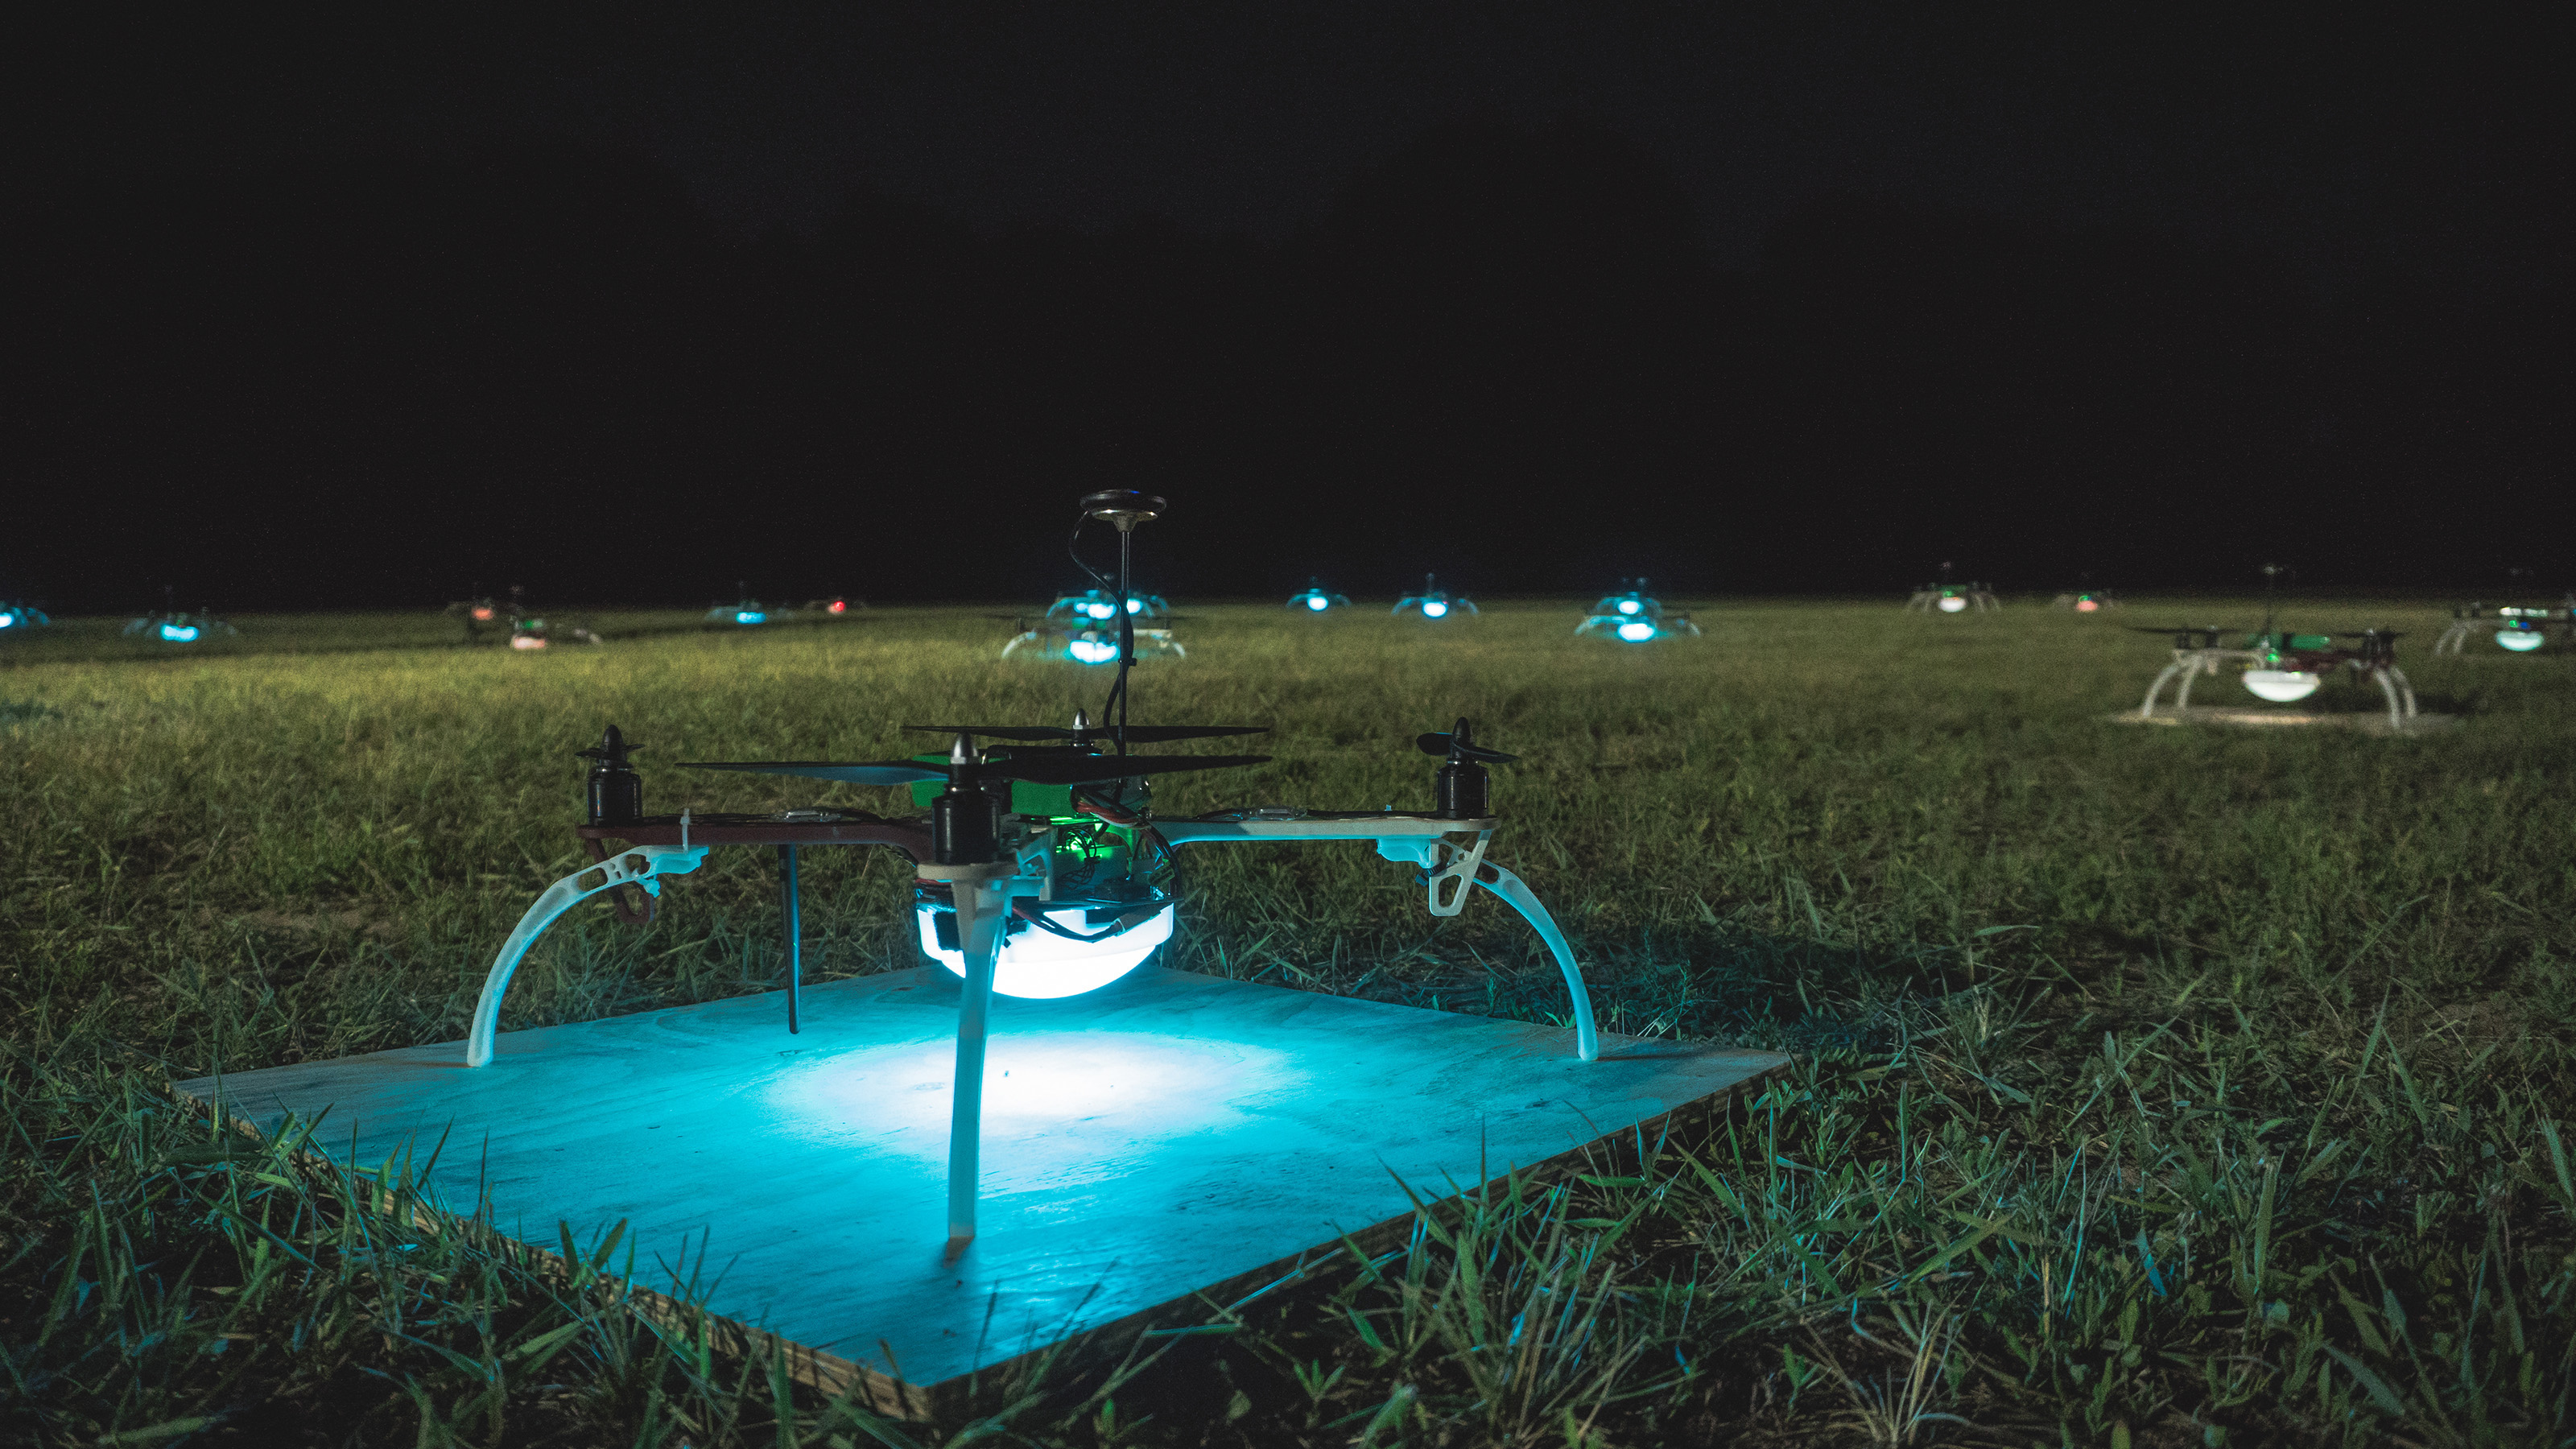 How To Tell A Drone At Night Drone Light Show Returns to Illuminate